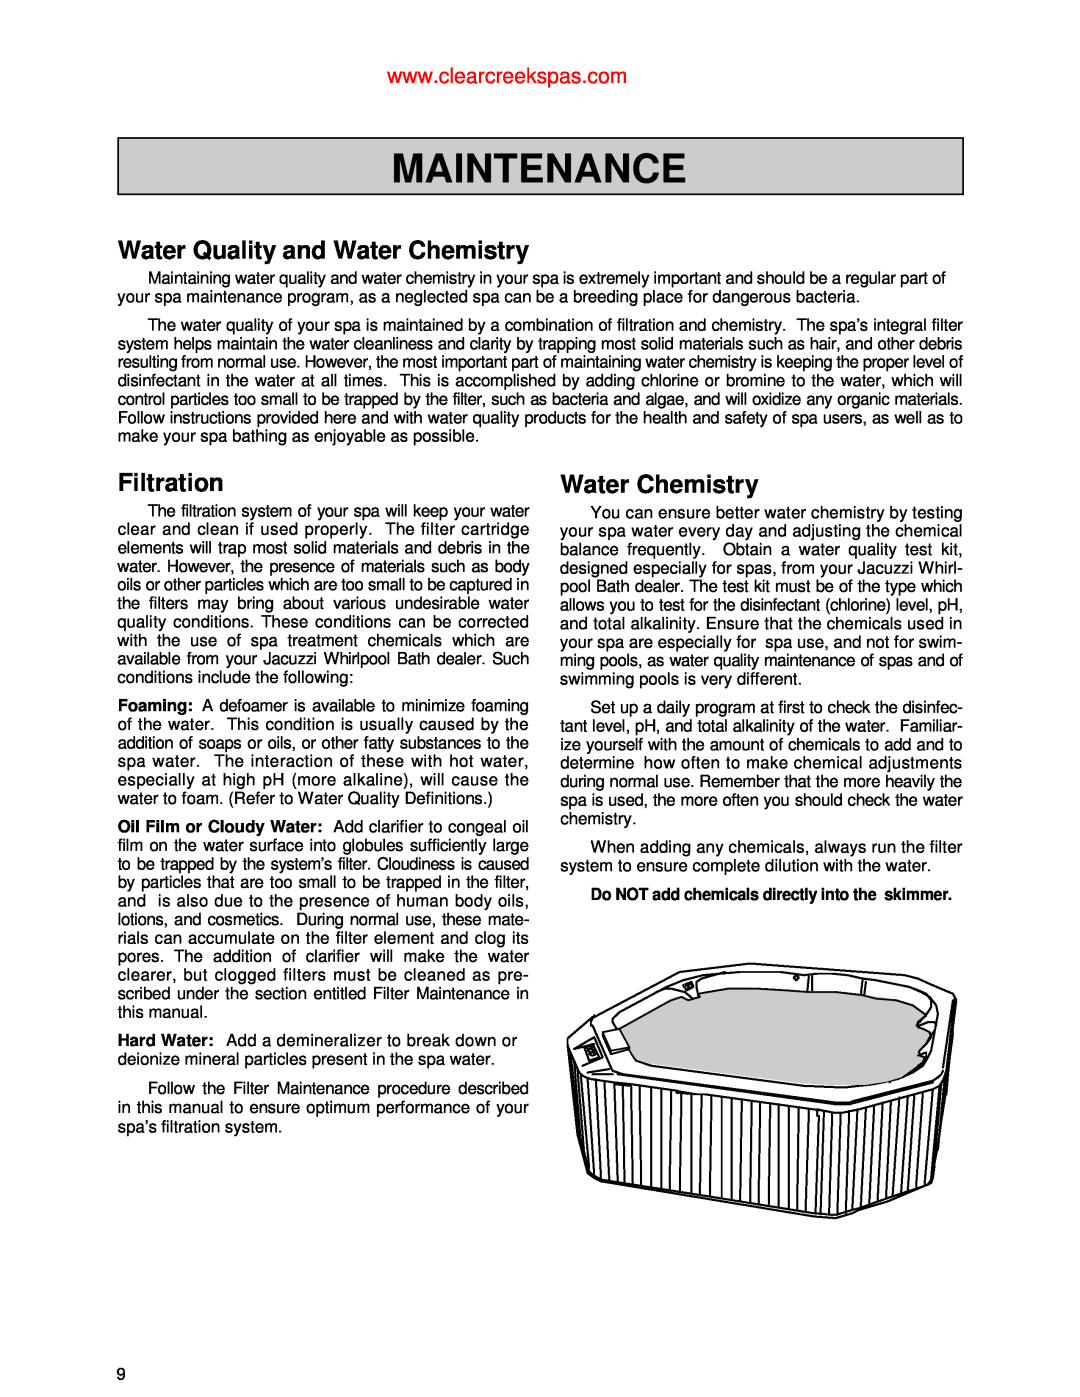 Jacuzzi Whirlpool Spa owner manual Maintenance, Water Quality and Water Chemistry, Filtration 